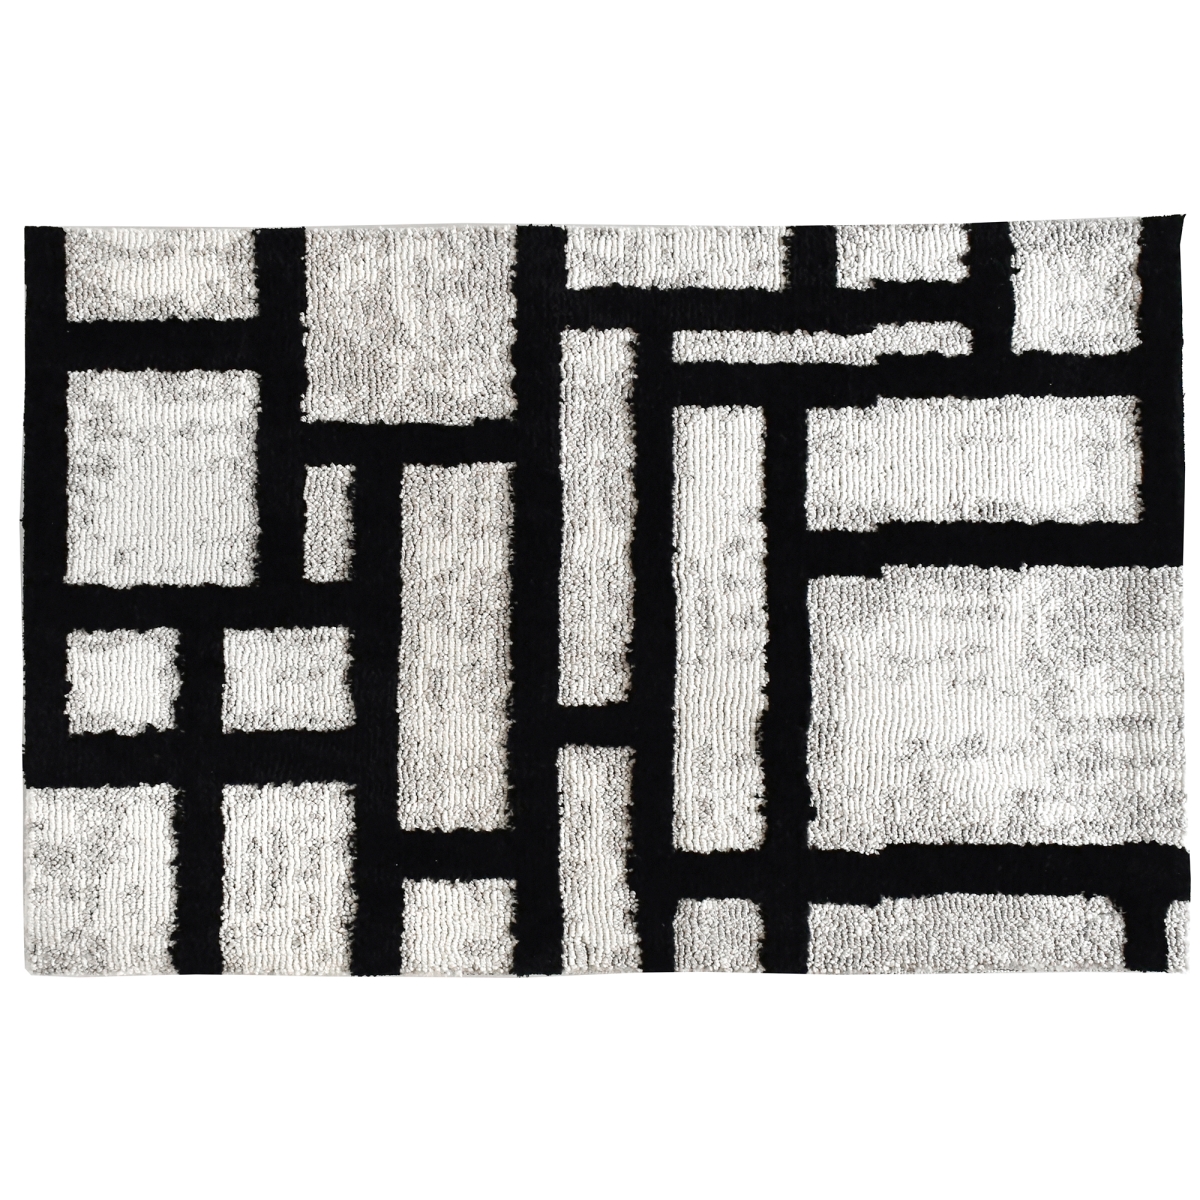 Ss-mhy001b 21 X 33 In. Labyrinth Indoor Accent Rug